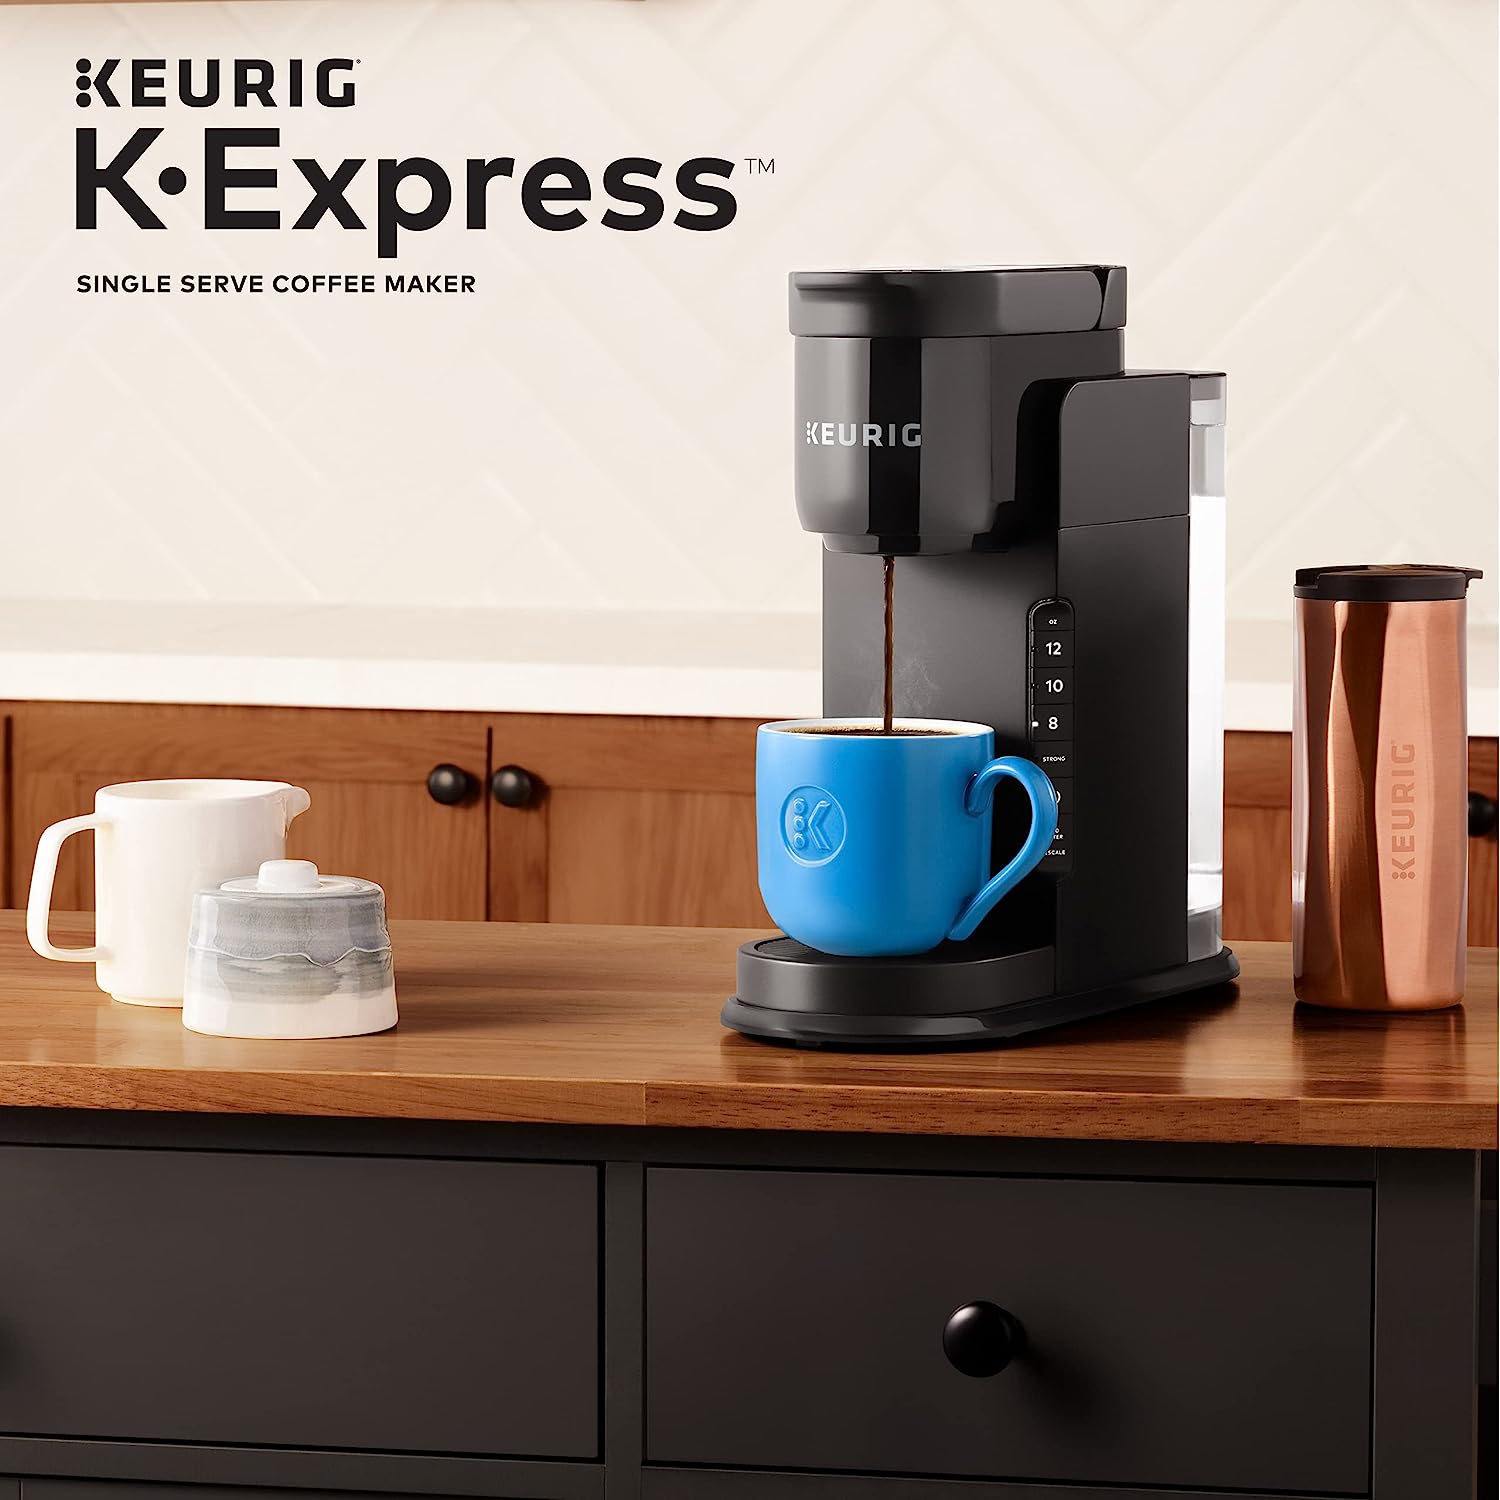 Prime Day 2023: These Keurig Brewers are on Discount During the Sale